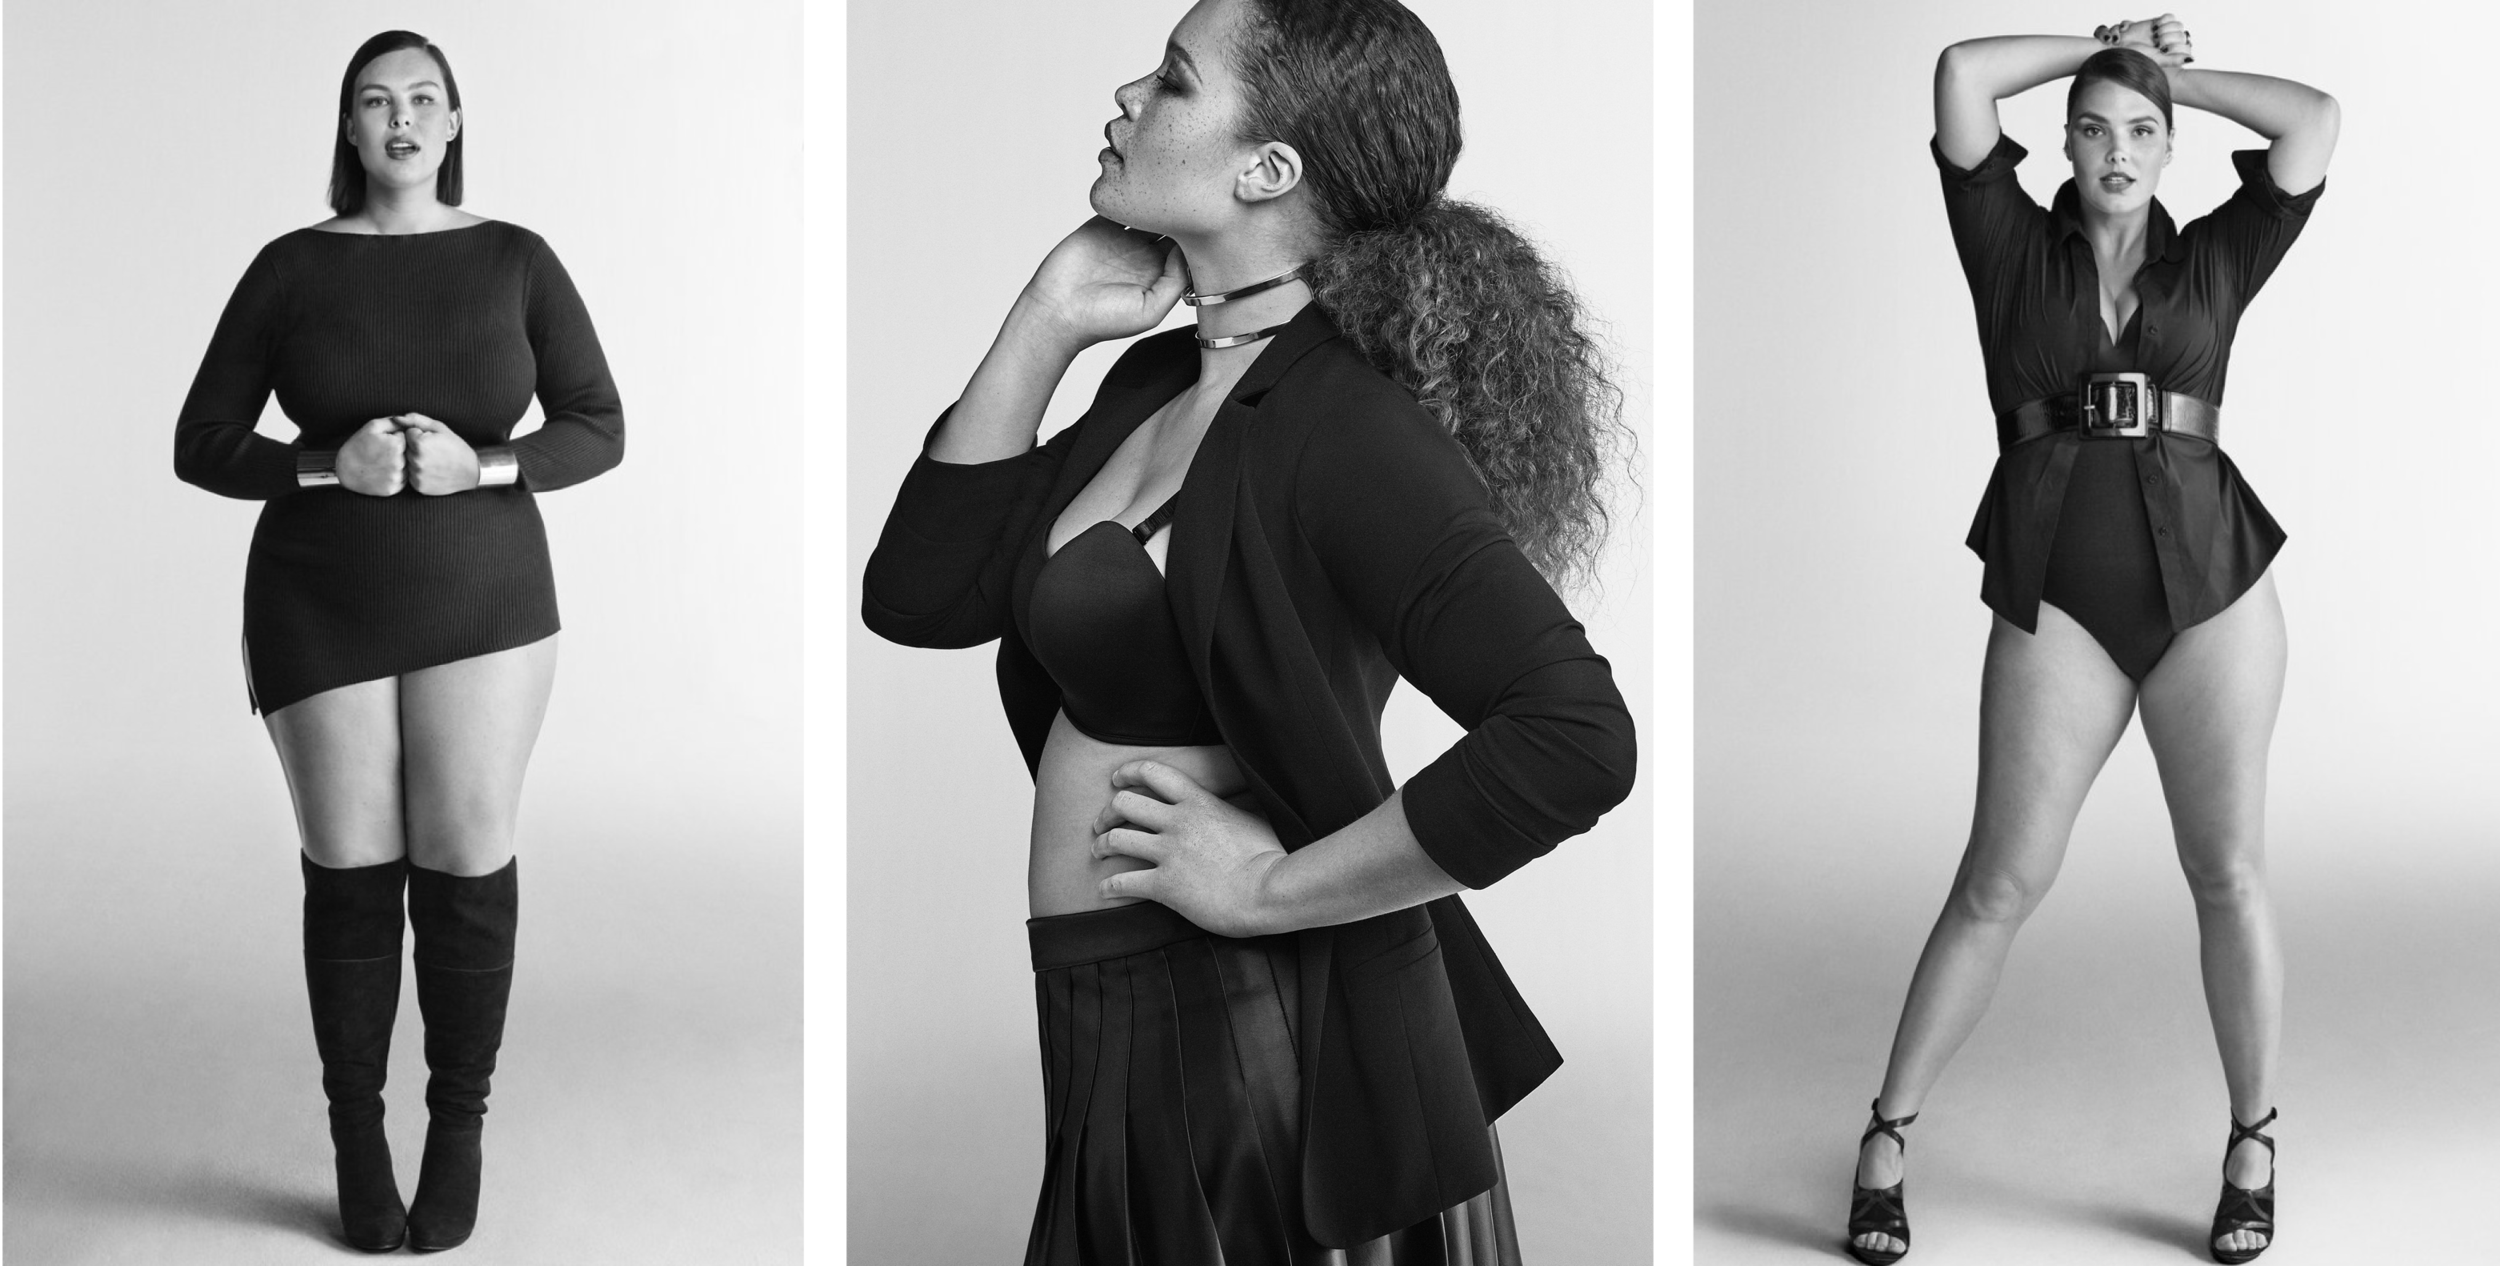 The Mysterious Faces Behind Lane Bryant's #PlusIsEqual Campaign Revealed